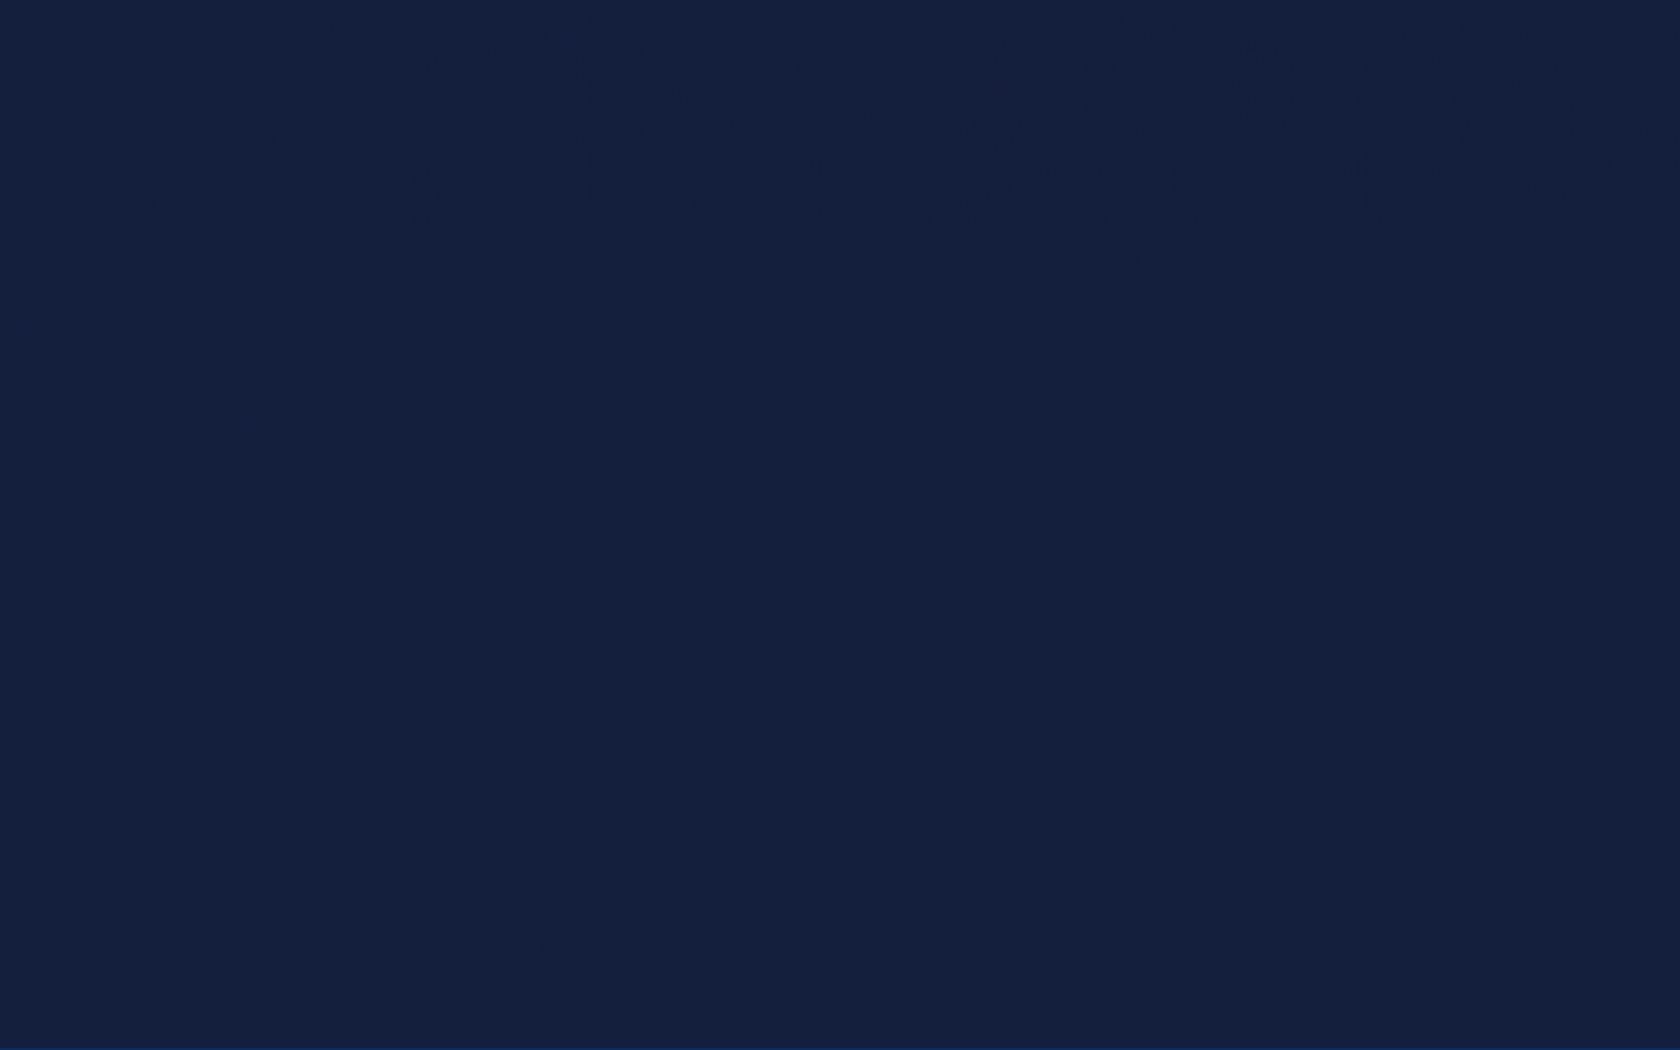 Navy Blue Background Which Is Under The